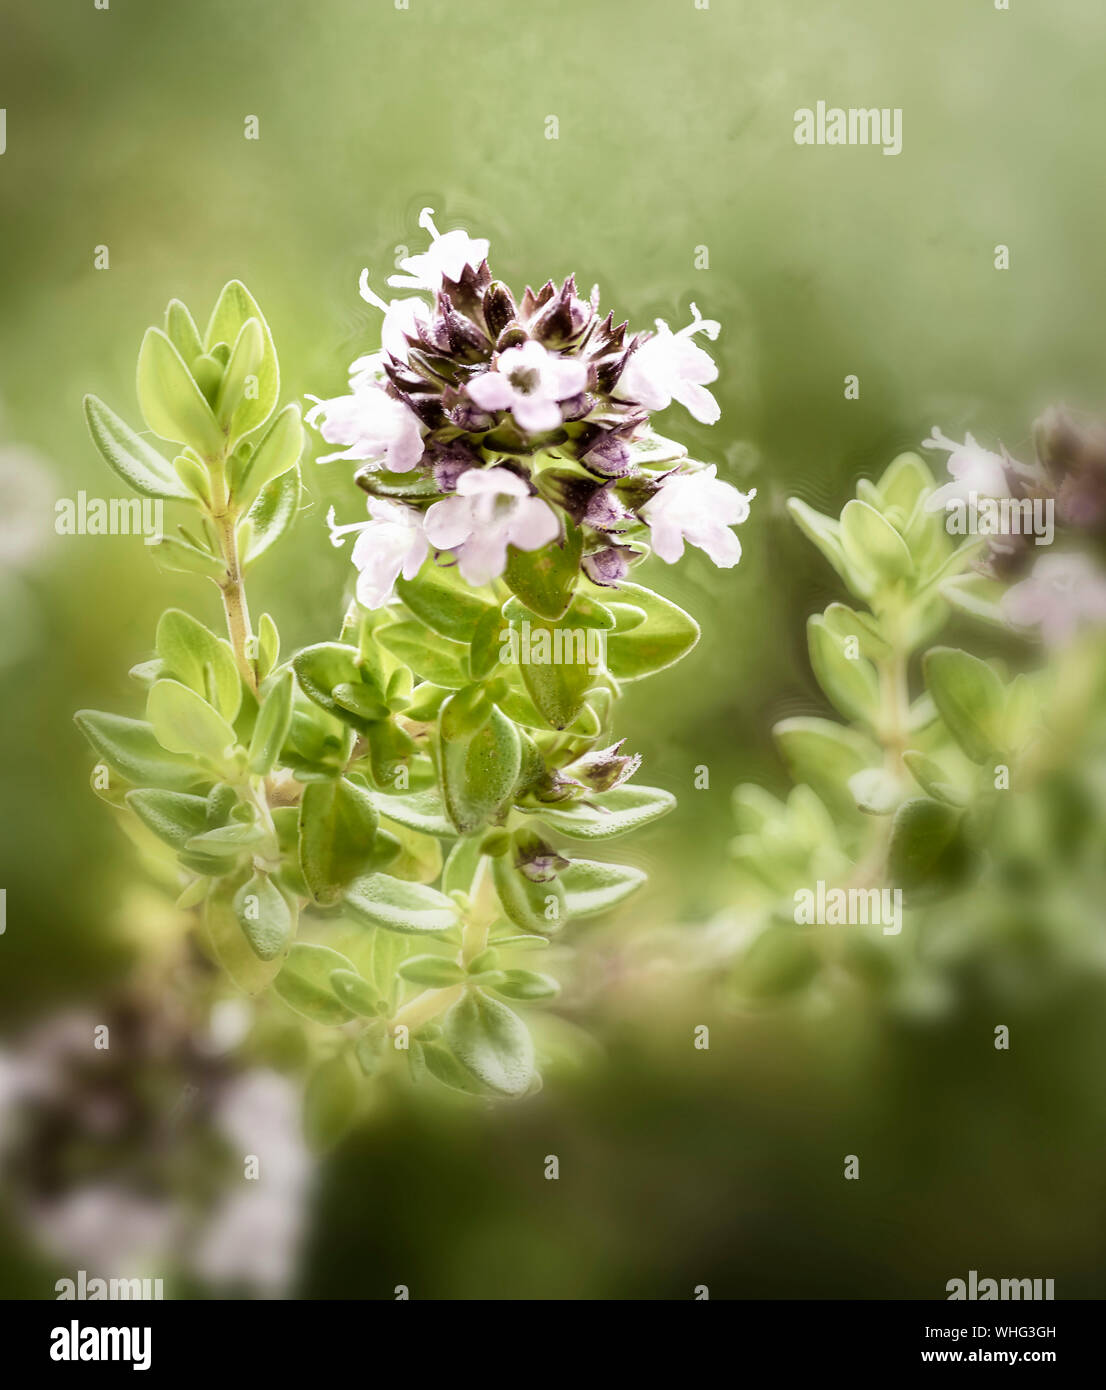 Extended focus close-up of thyme herb flower against an out of focus garden background Stock Photo